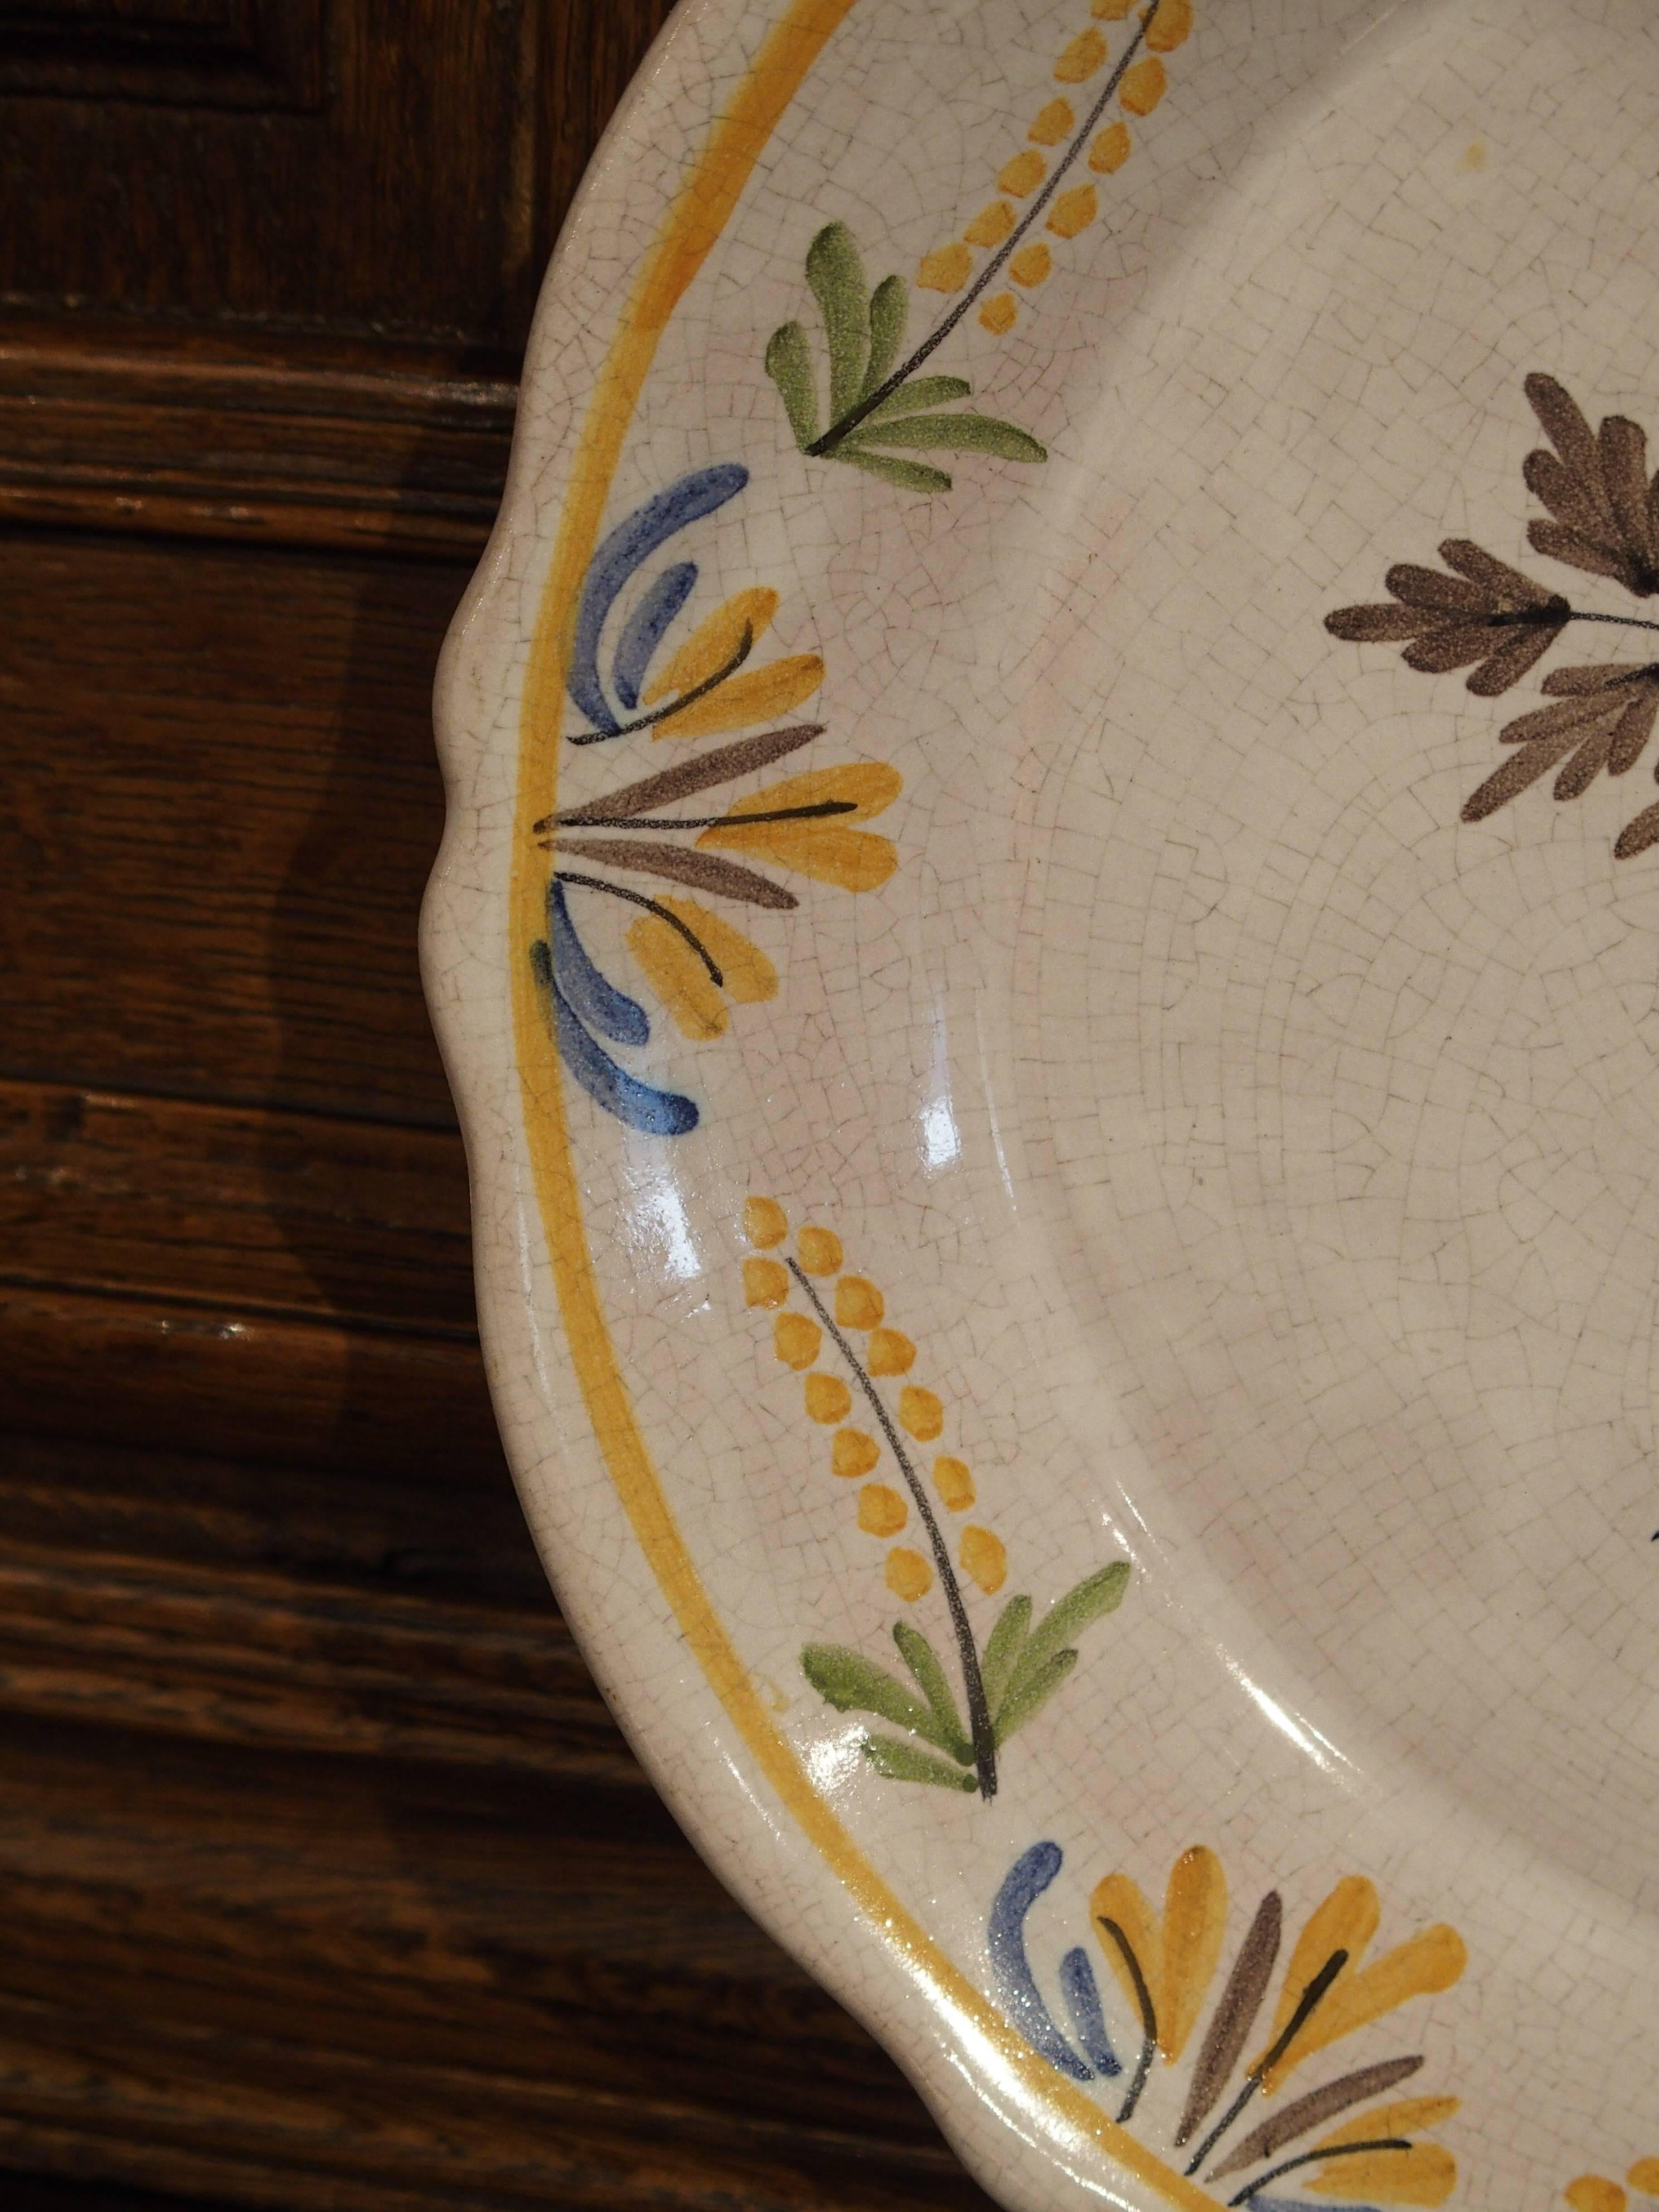 20th Century Hand-Painted French Faience, 18th Century Reproduction Plate, Mid-1900s